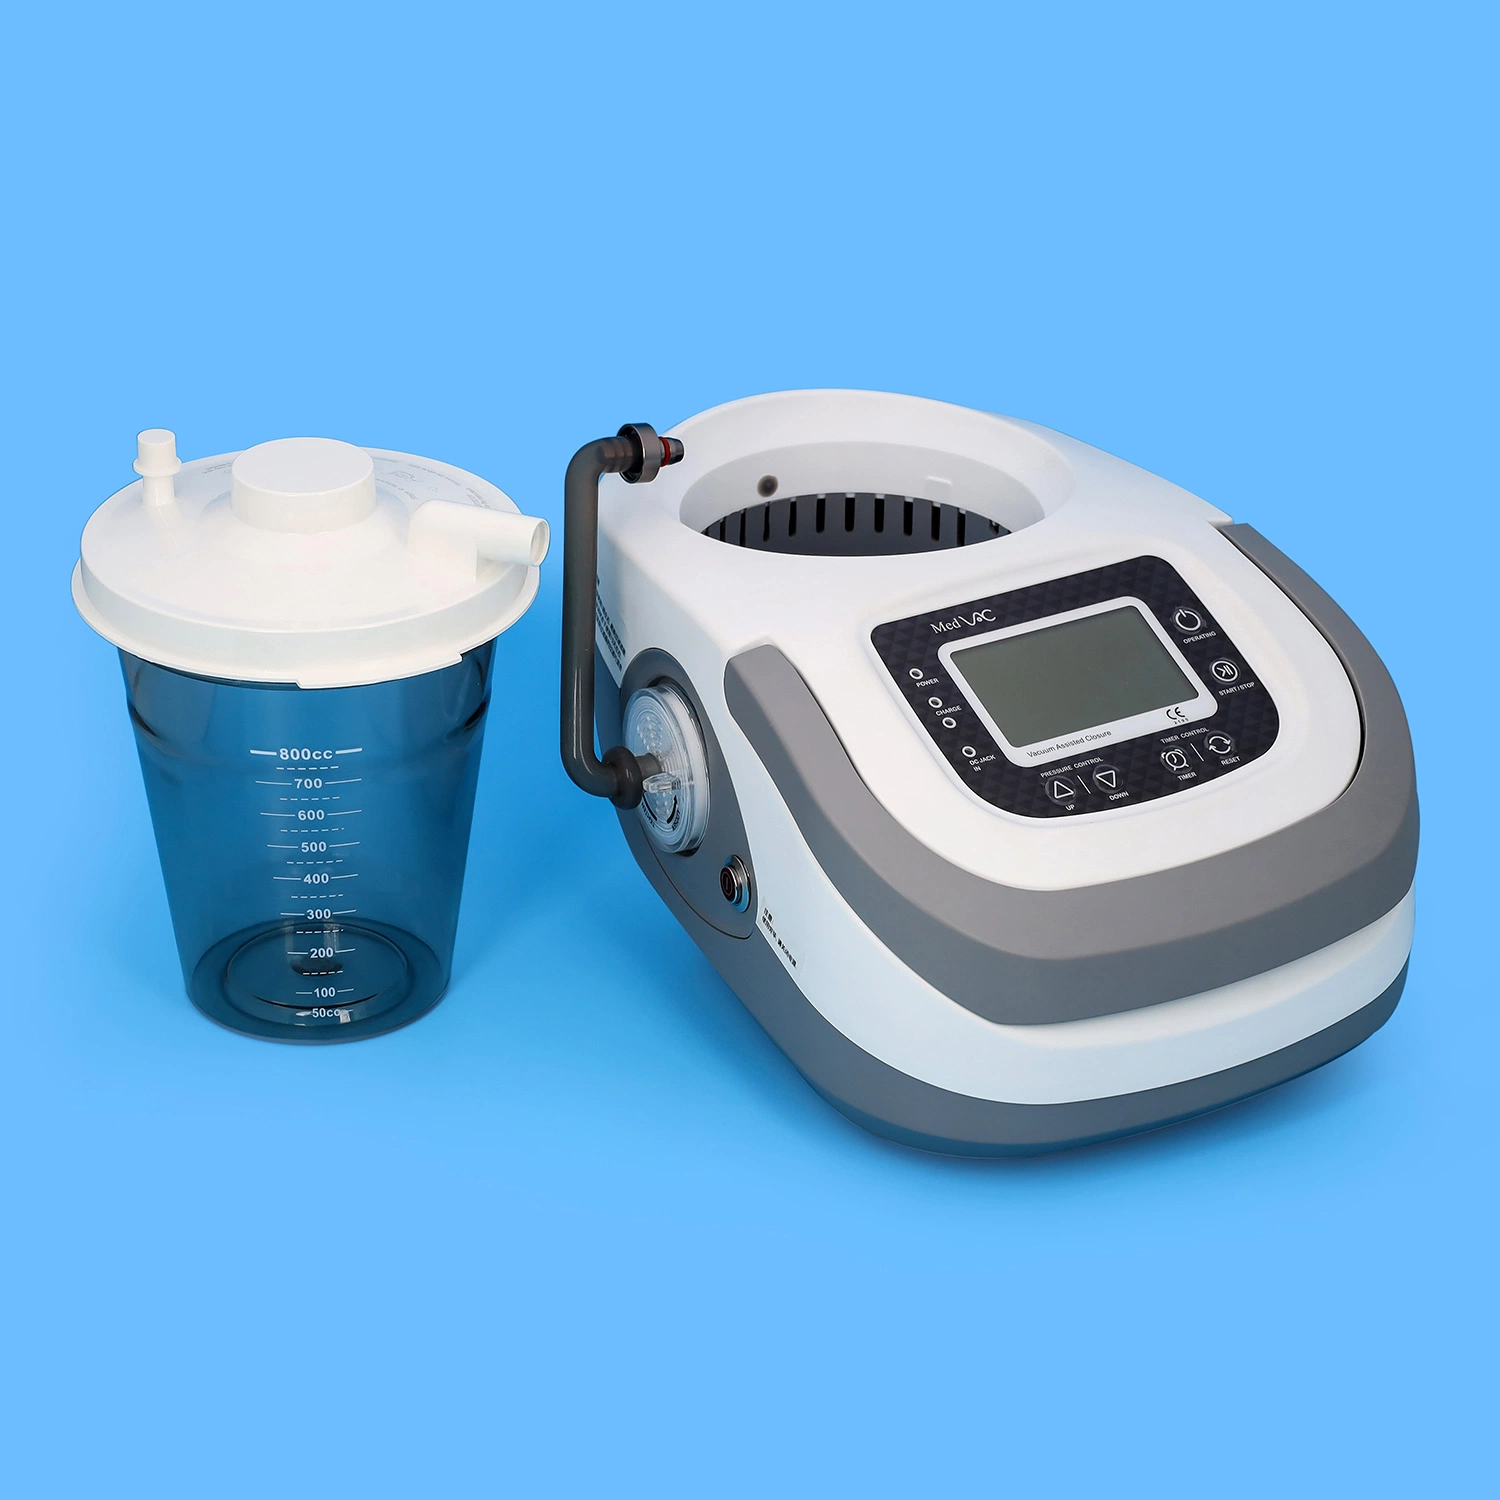 Therapy VAC/Npwt Equipment Negative Pressure Wound Treatment Machine for Wound Care